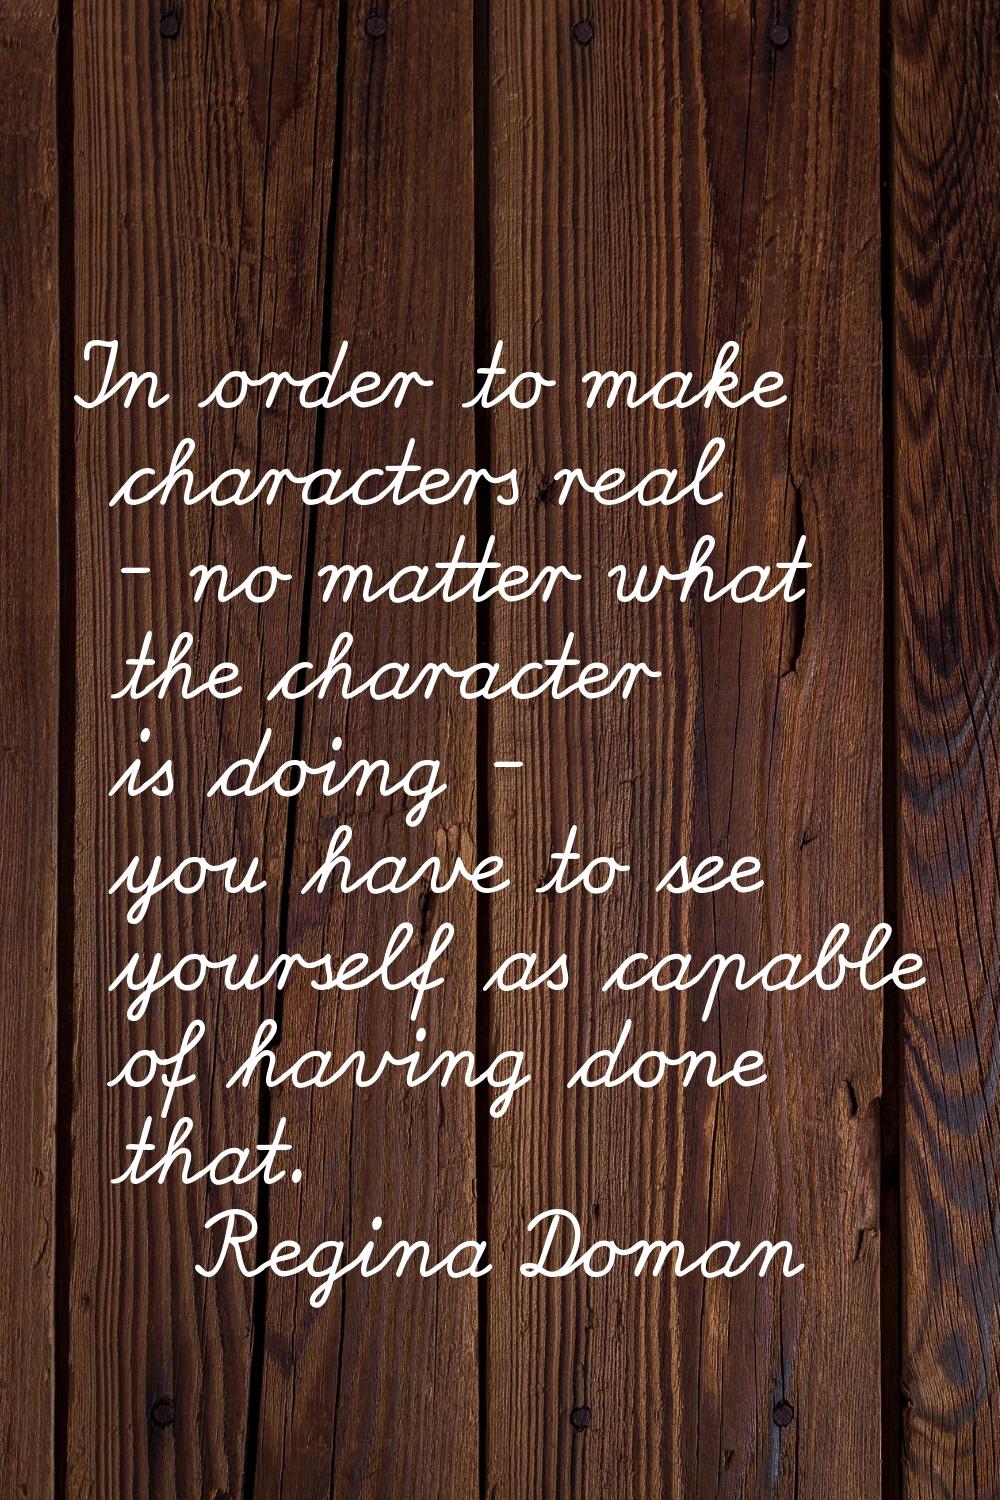 In order to make characters real - no matter what the character is doing - you have to see yourself